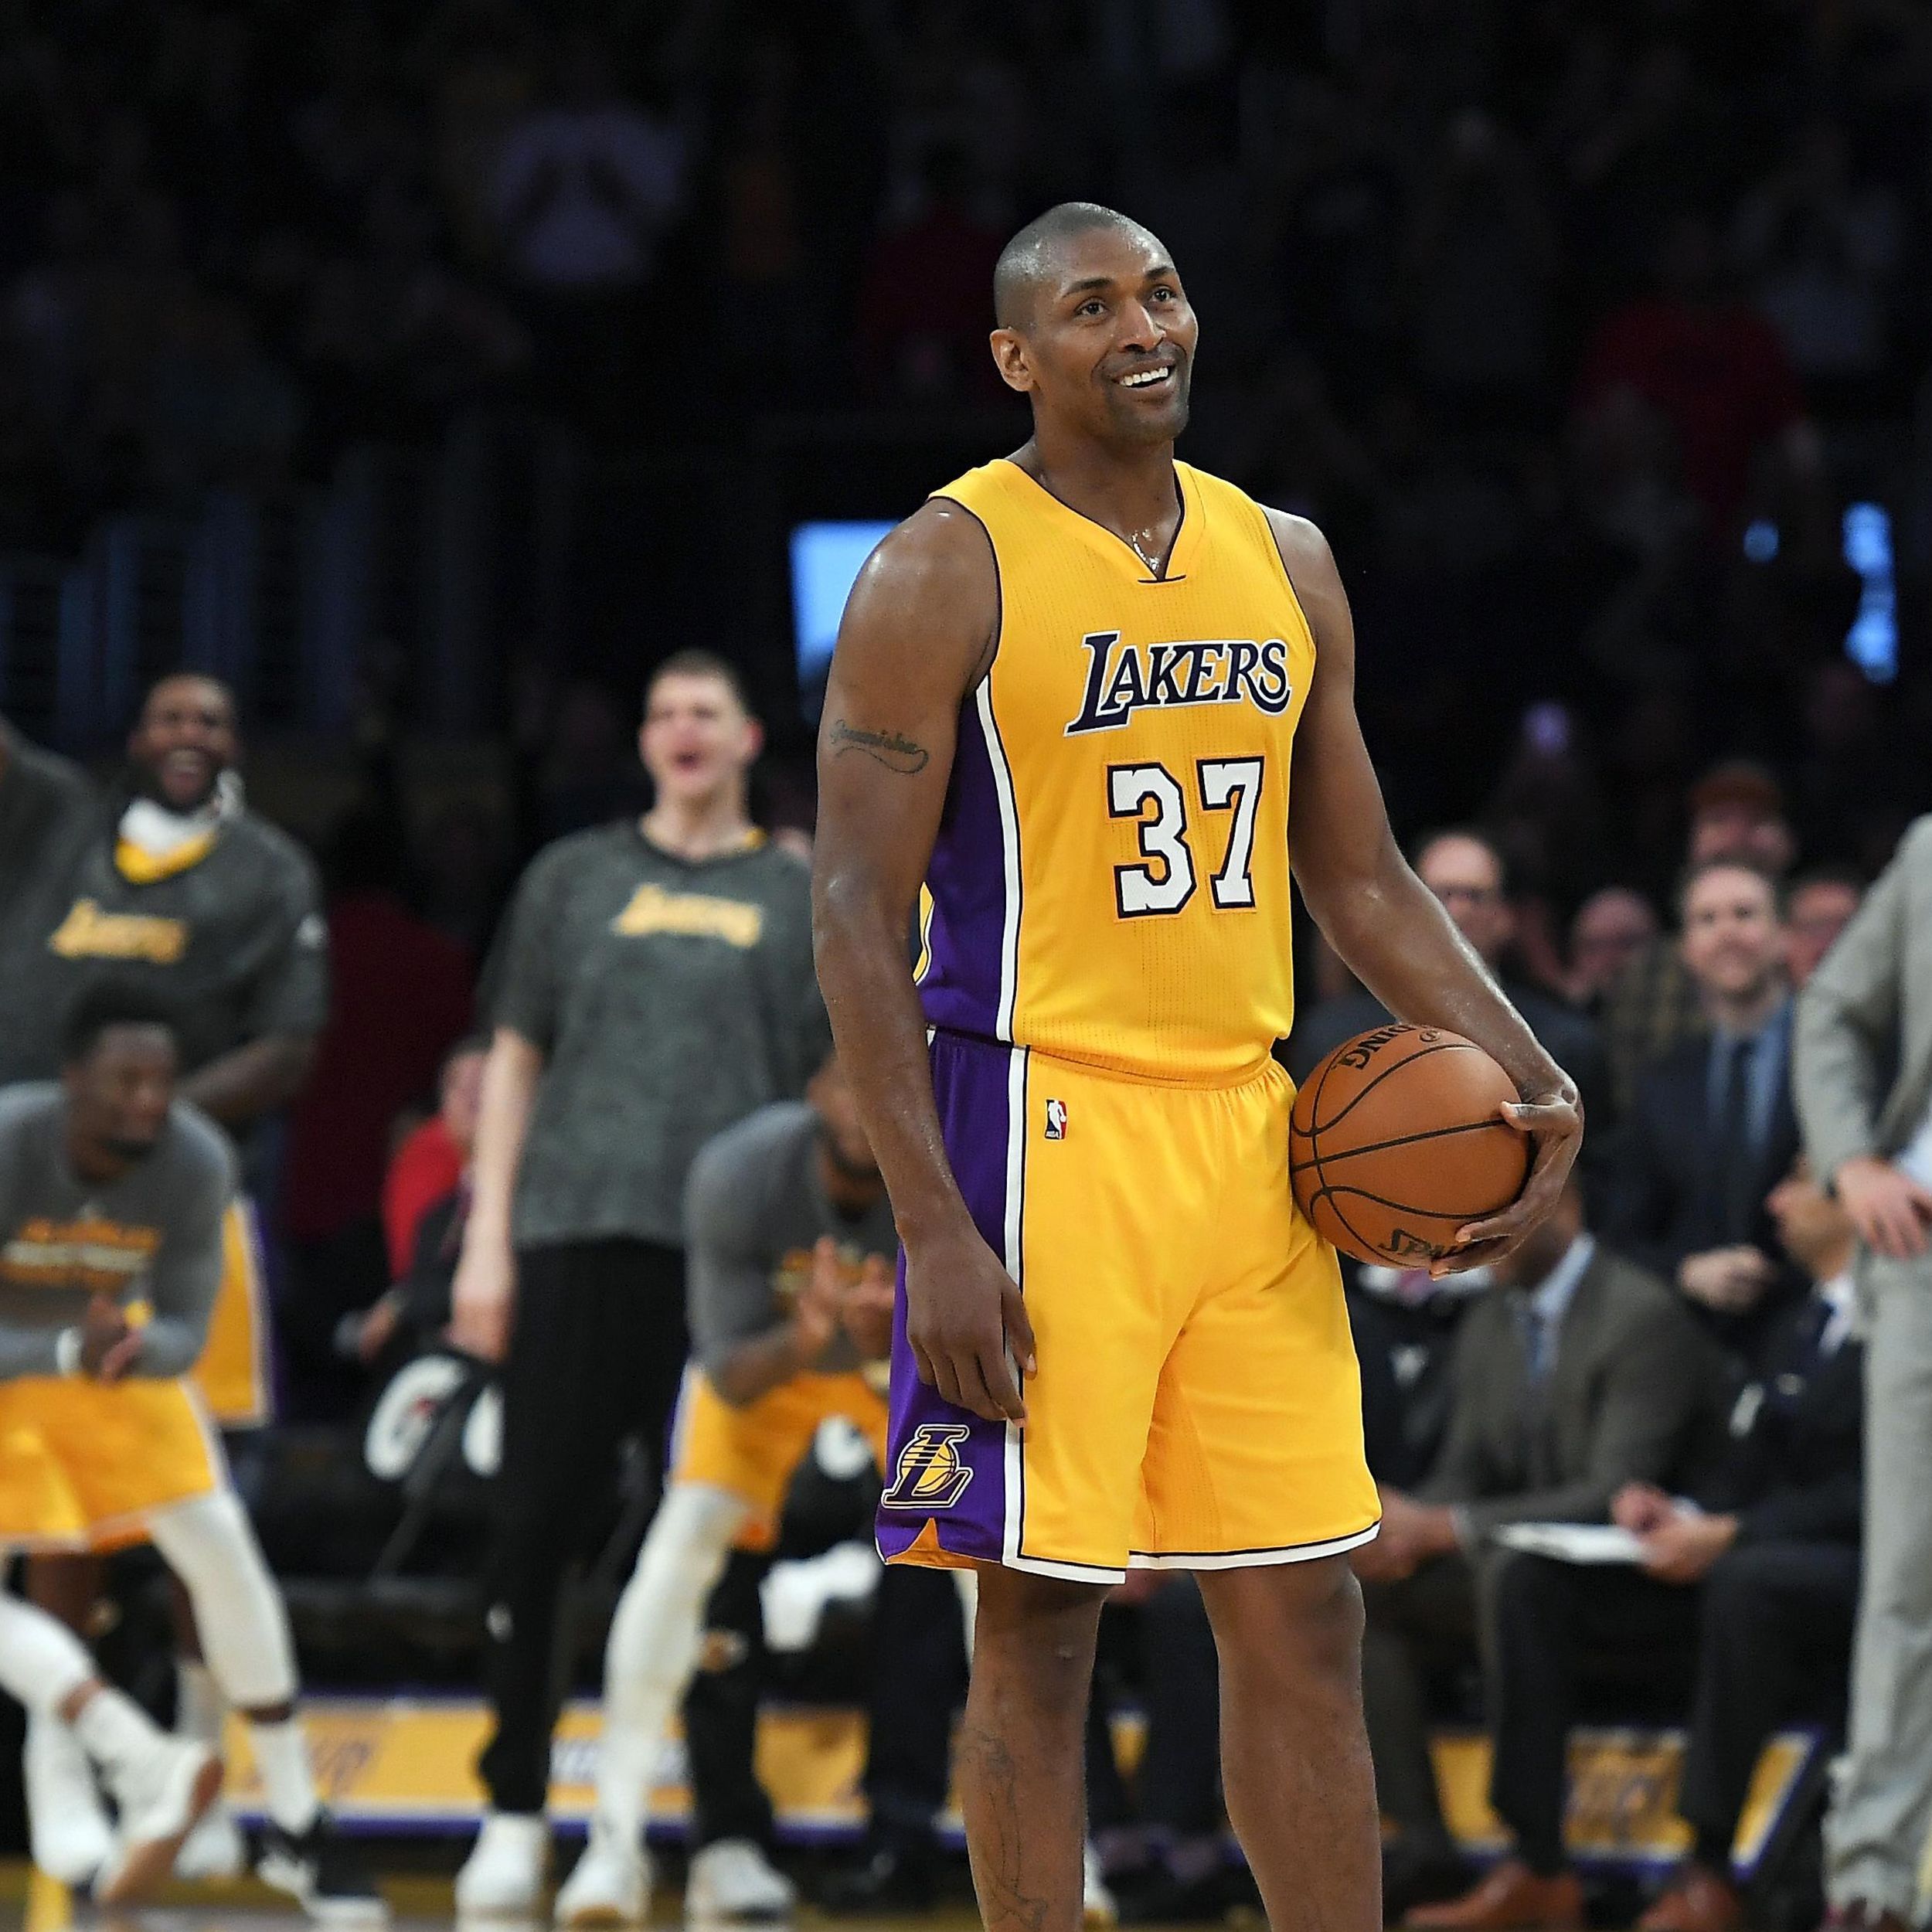 Metta World Peace talks regrets from his time with the Pacers